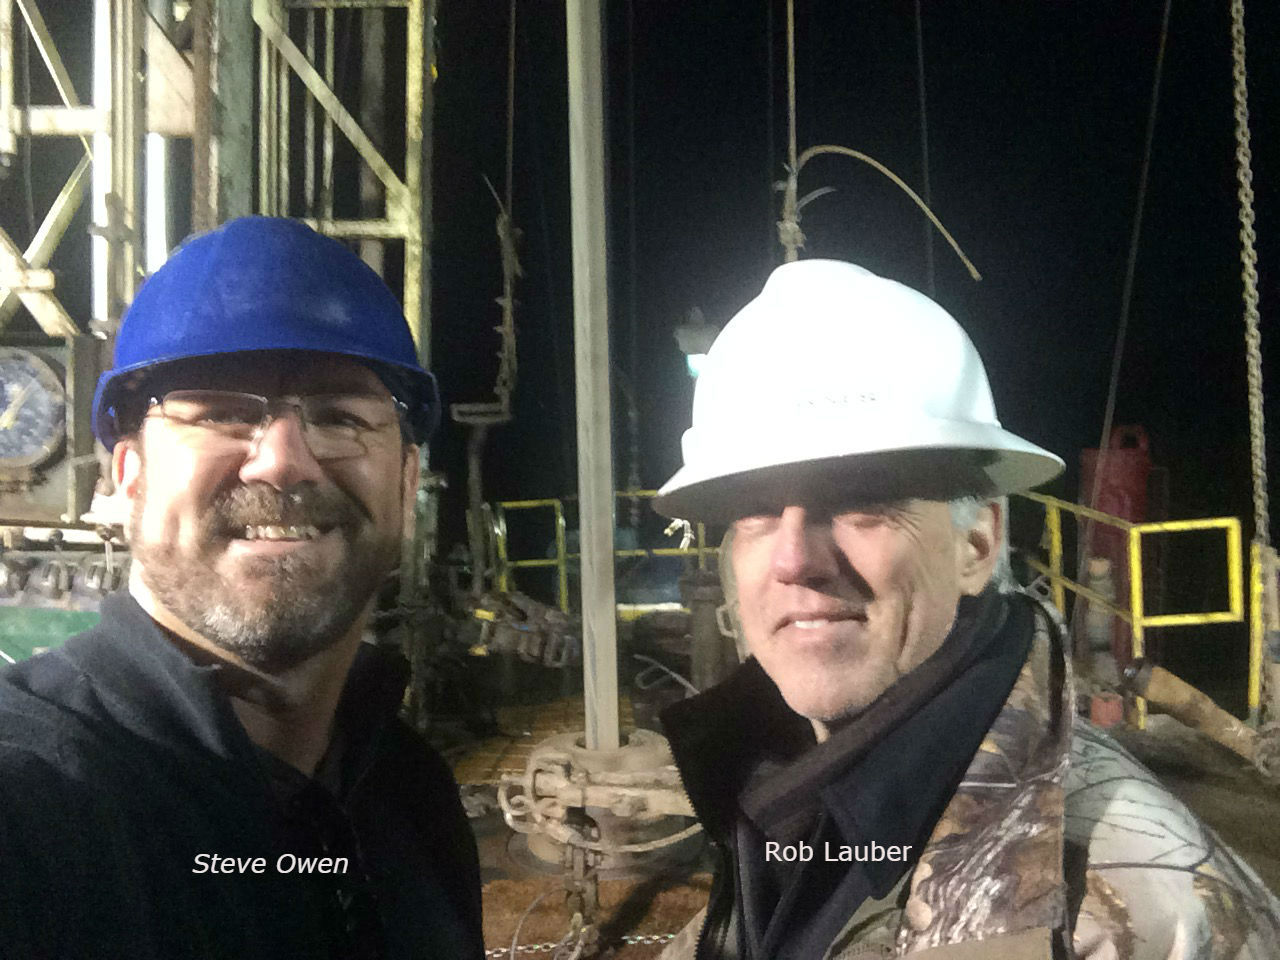 CEG Holdings - Steve Owen, CEO of CEG Holdings(Left), and Rob Lauber, SVP of CEG Holdings(Right) - South Hammon Project Matagorda County, TX